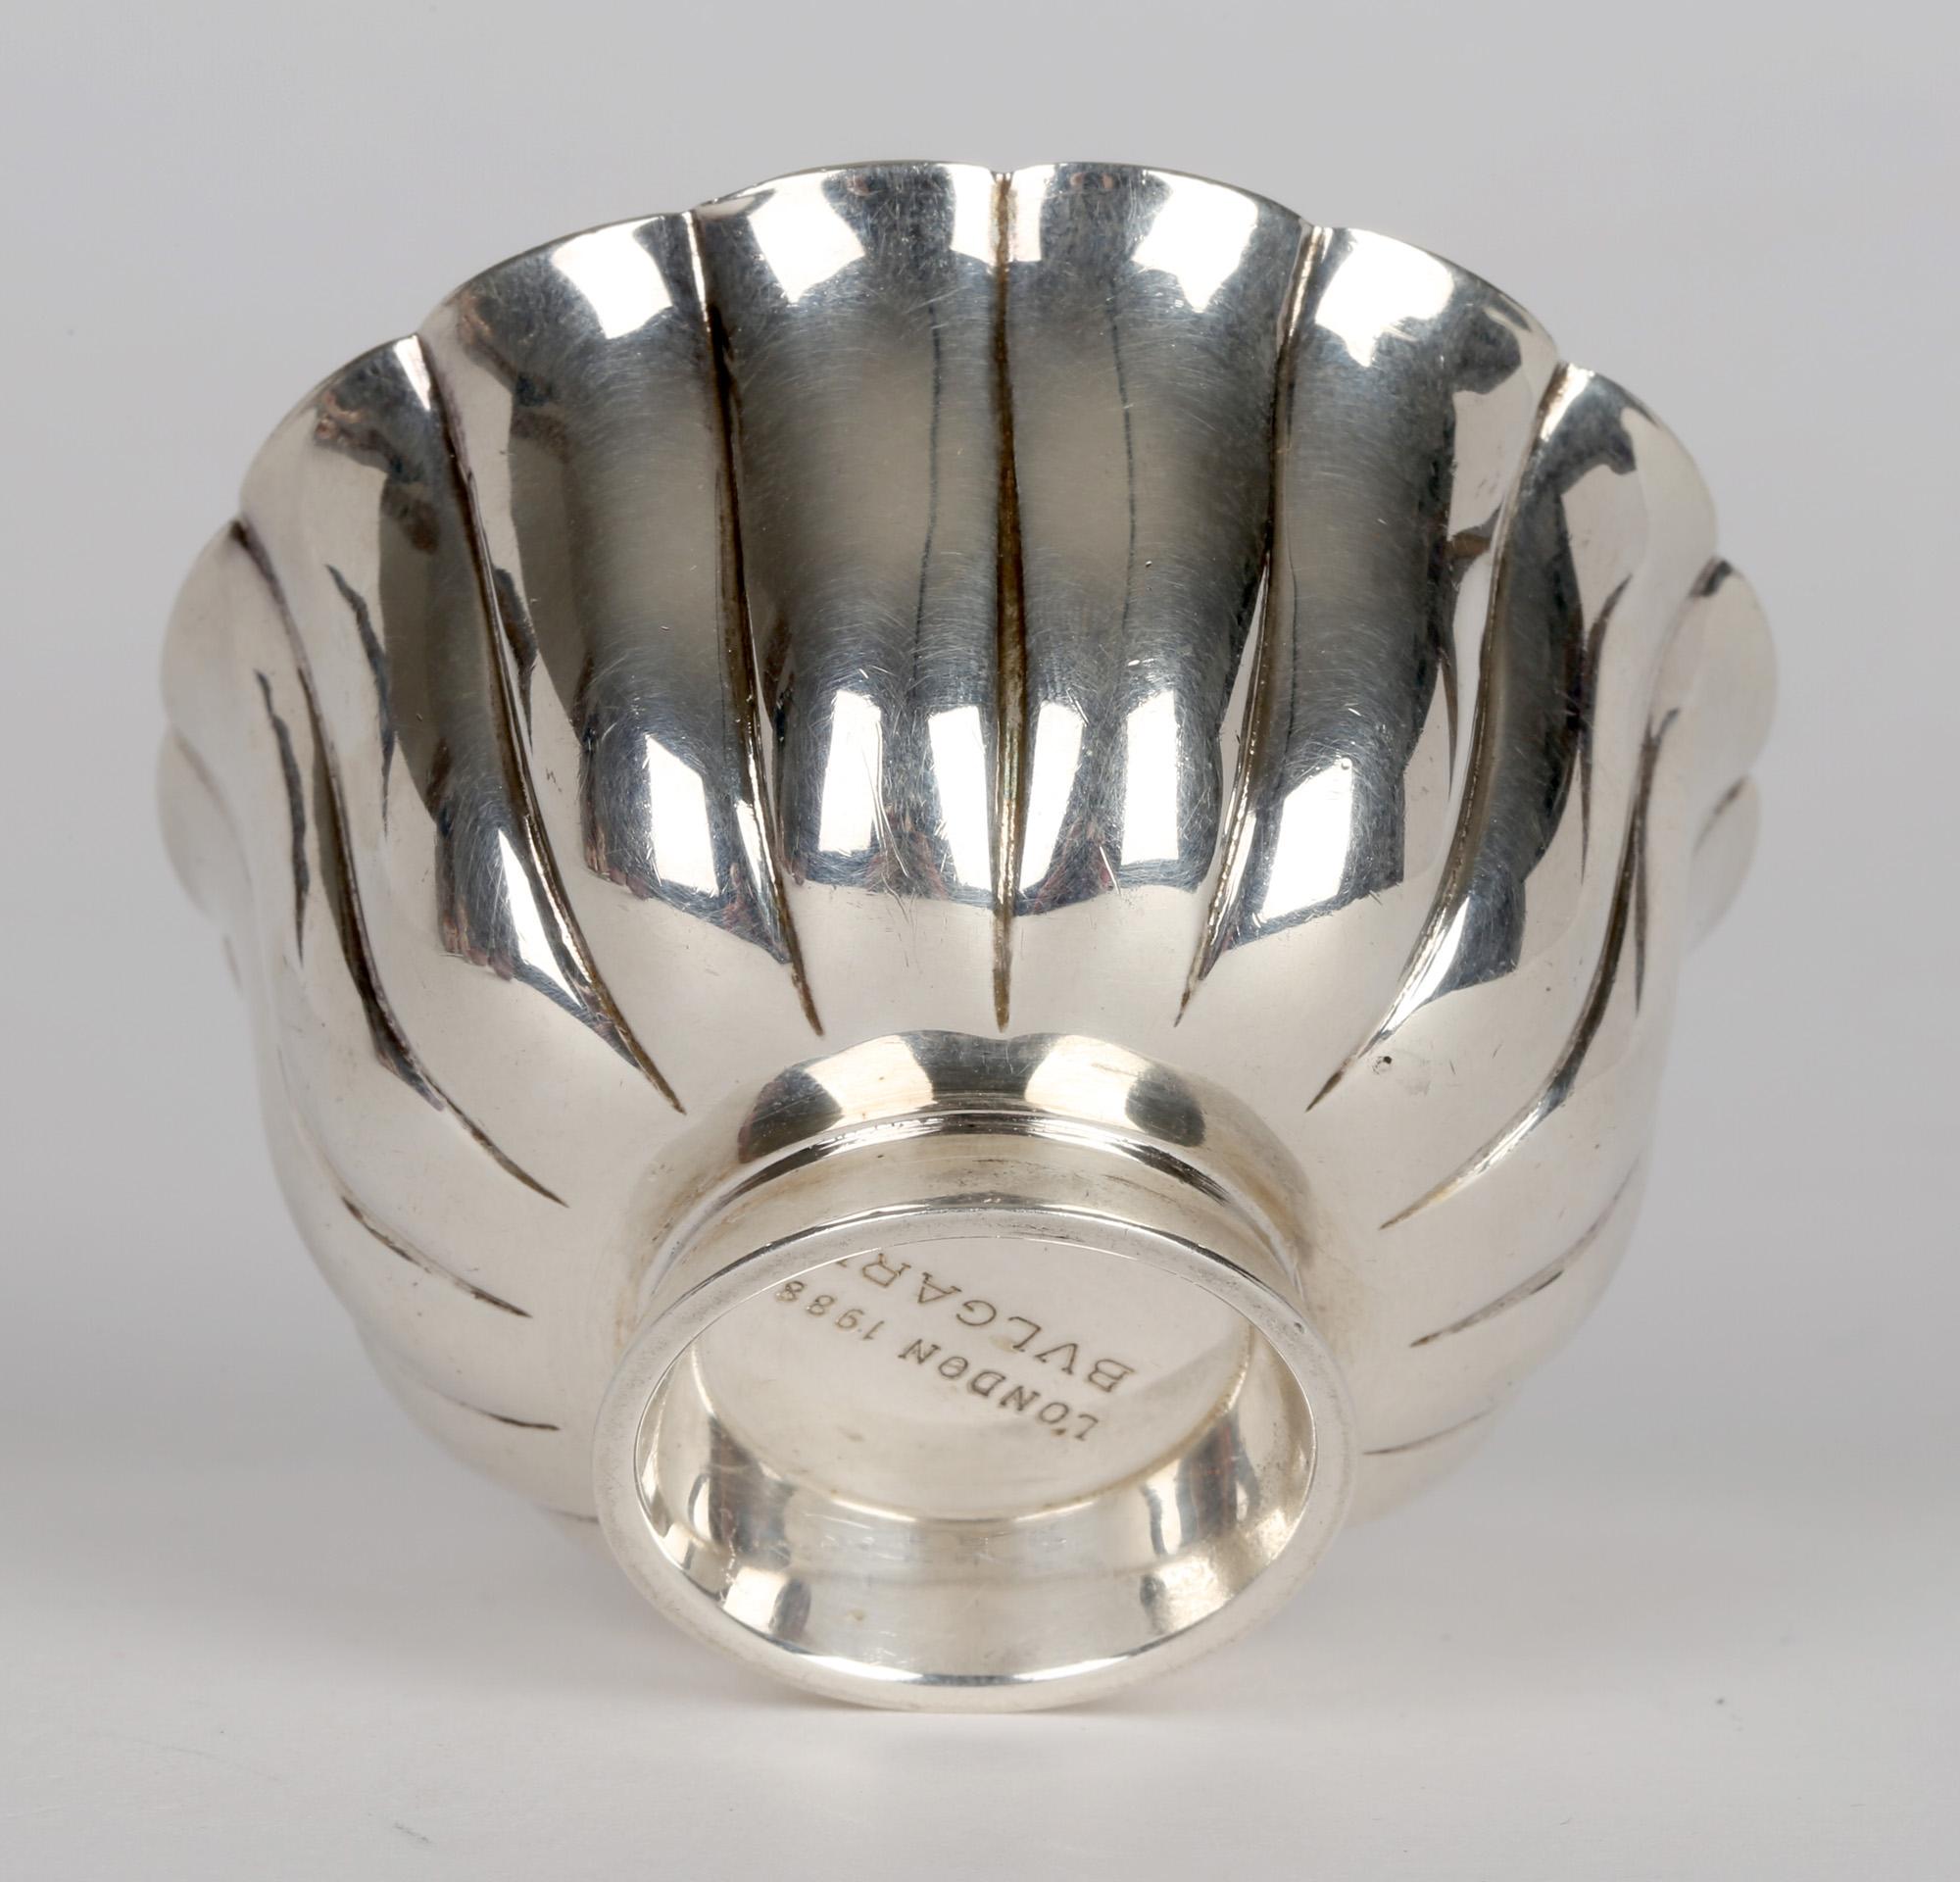 Hand-Crafted Bulgari Italian Quality Silver Fluted Bowl Marked London 1988